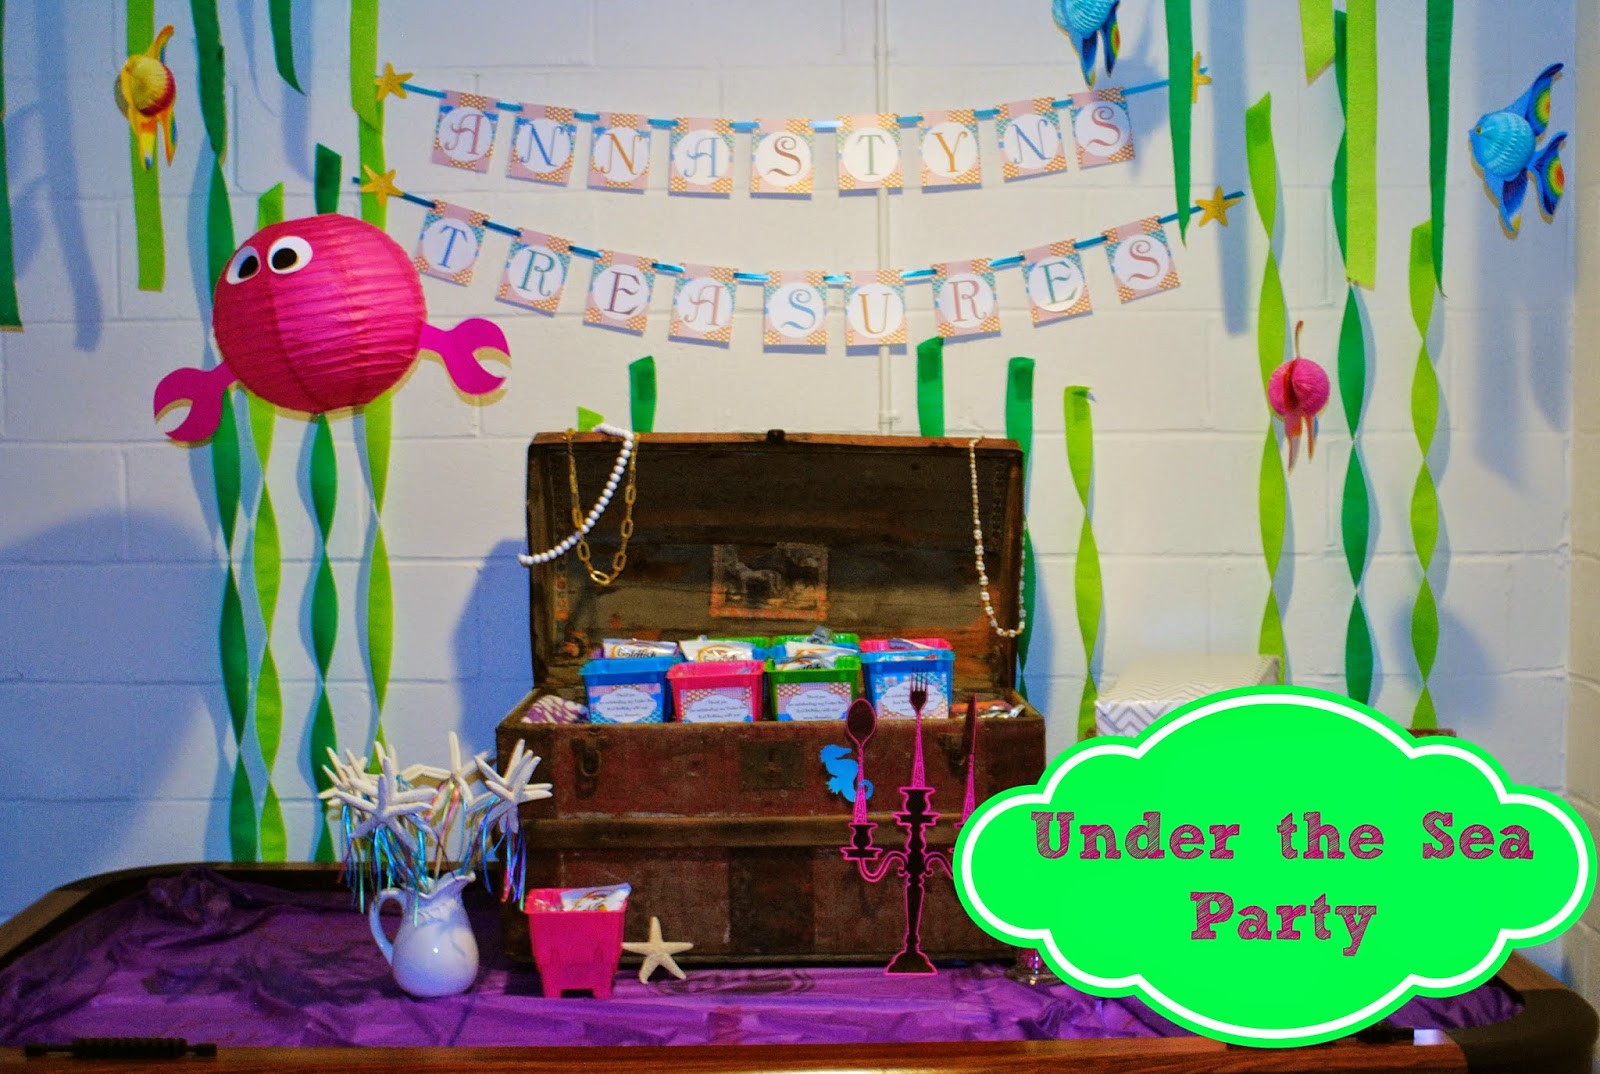 Under The Sea Birthday Decorations
 Our Pinteresting Family Under the Sea Birthday Party